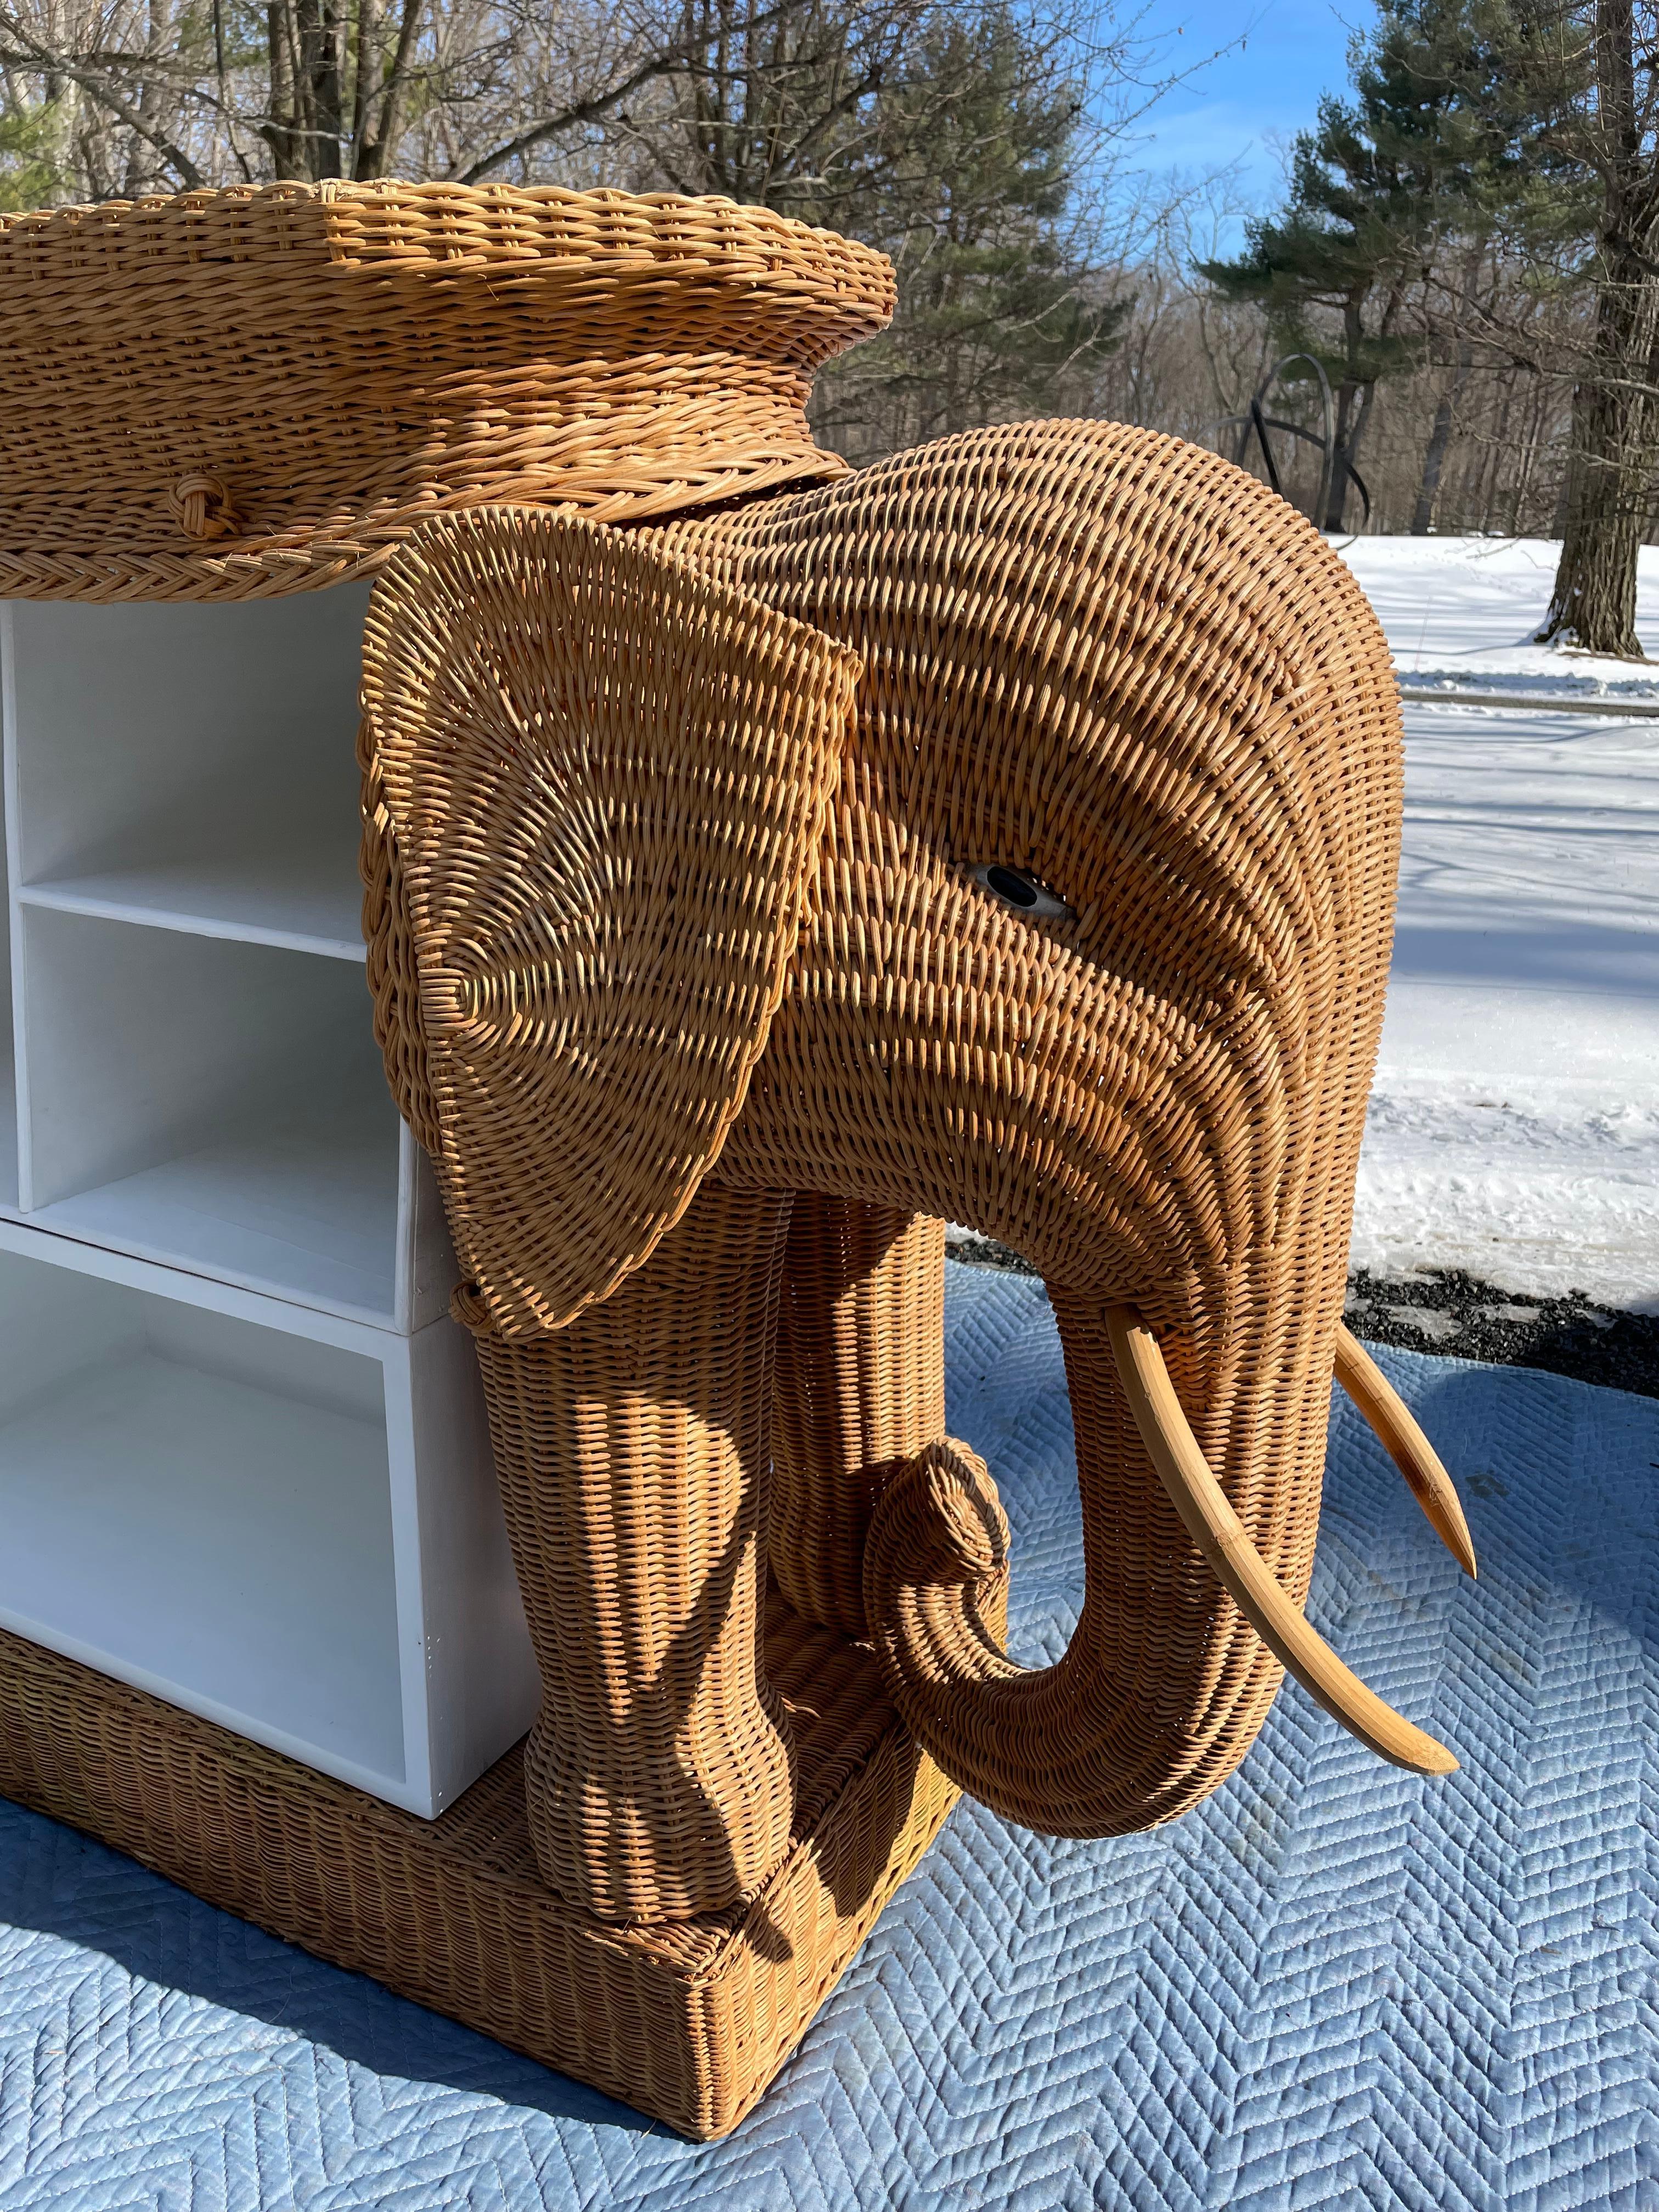 Fabulously whimsical vintage rattan dry bar having the form of two elephants facing in opposite directions. Each elephant is shown from head to shoulders with two front legs on a rectangular plinth. A long wooden oval top in white paint bordered in